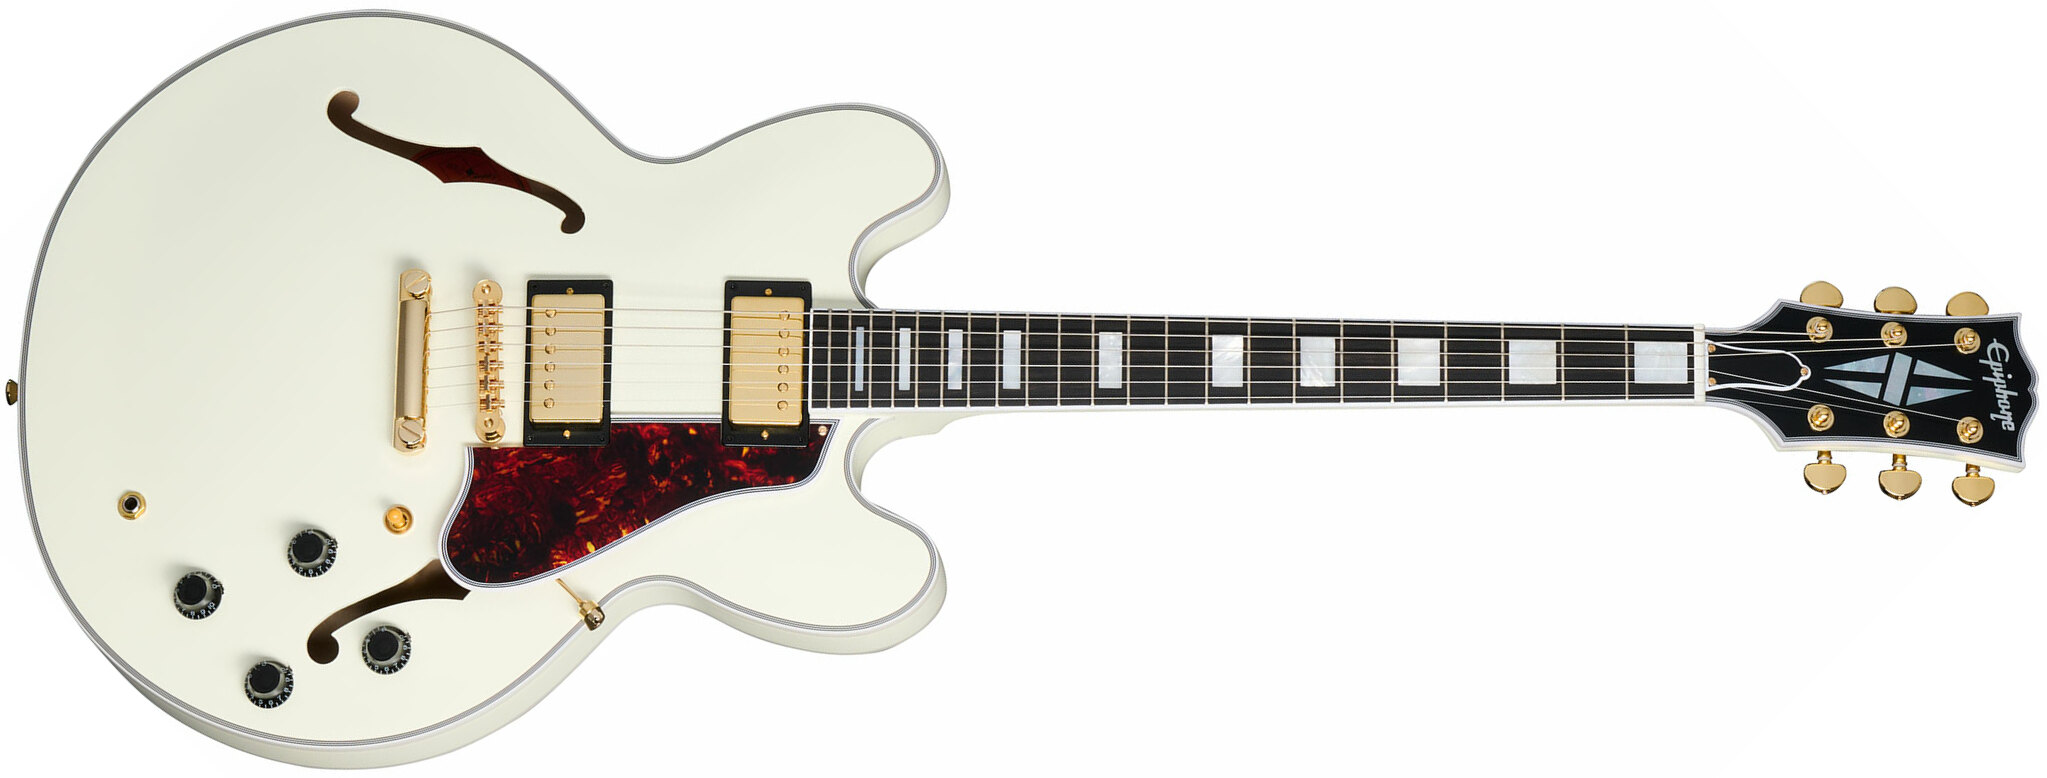 Epiphone Es355 1959 Inspired By 2h Gibson Ht Eb - Vos Classic White - Semi hollow elektriche gitaar - Main picture